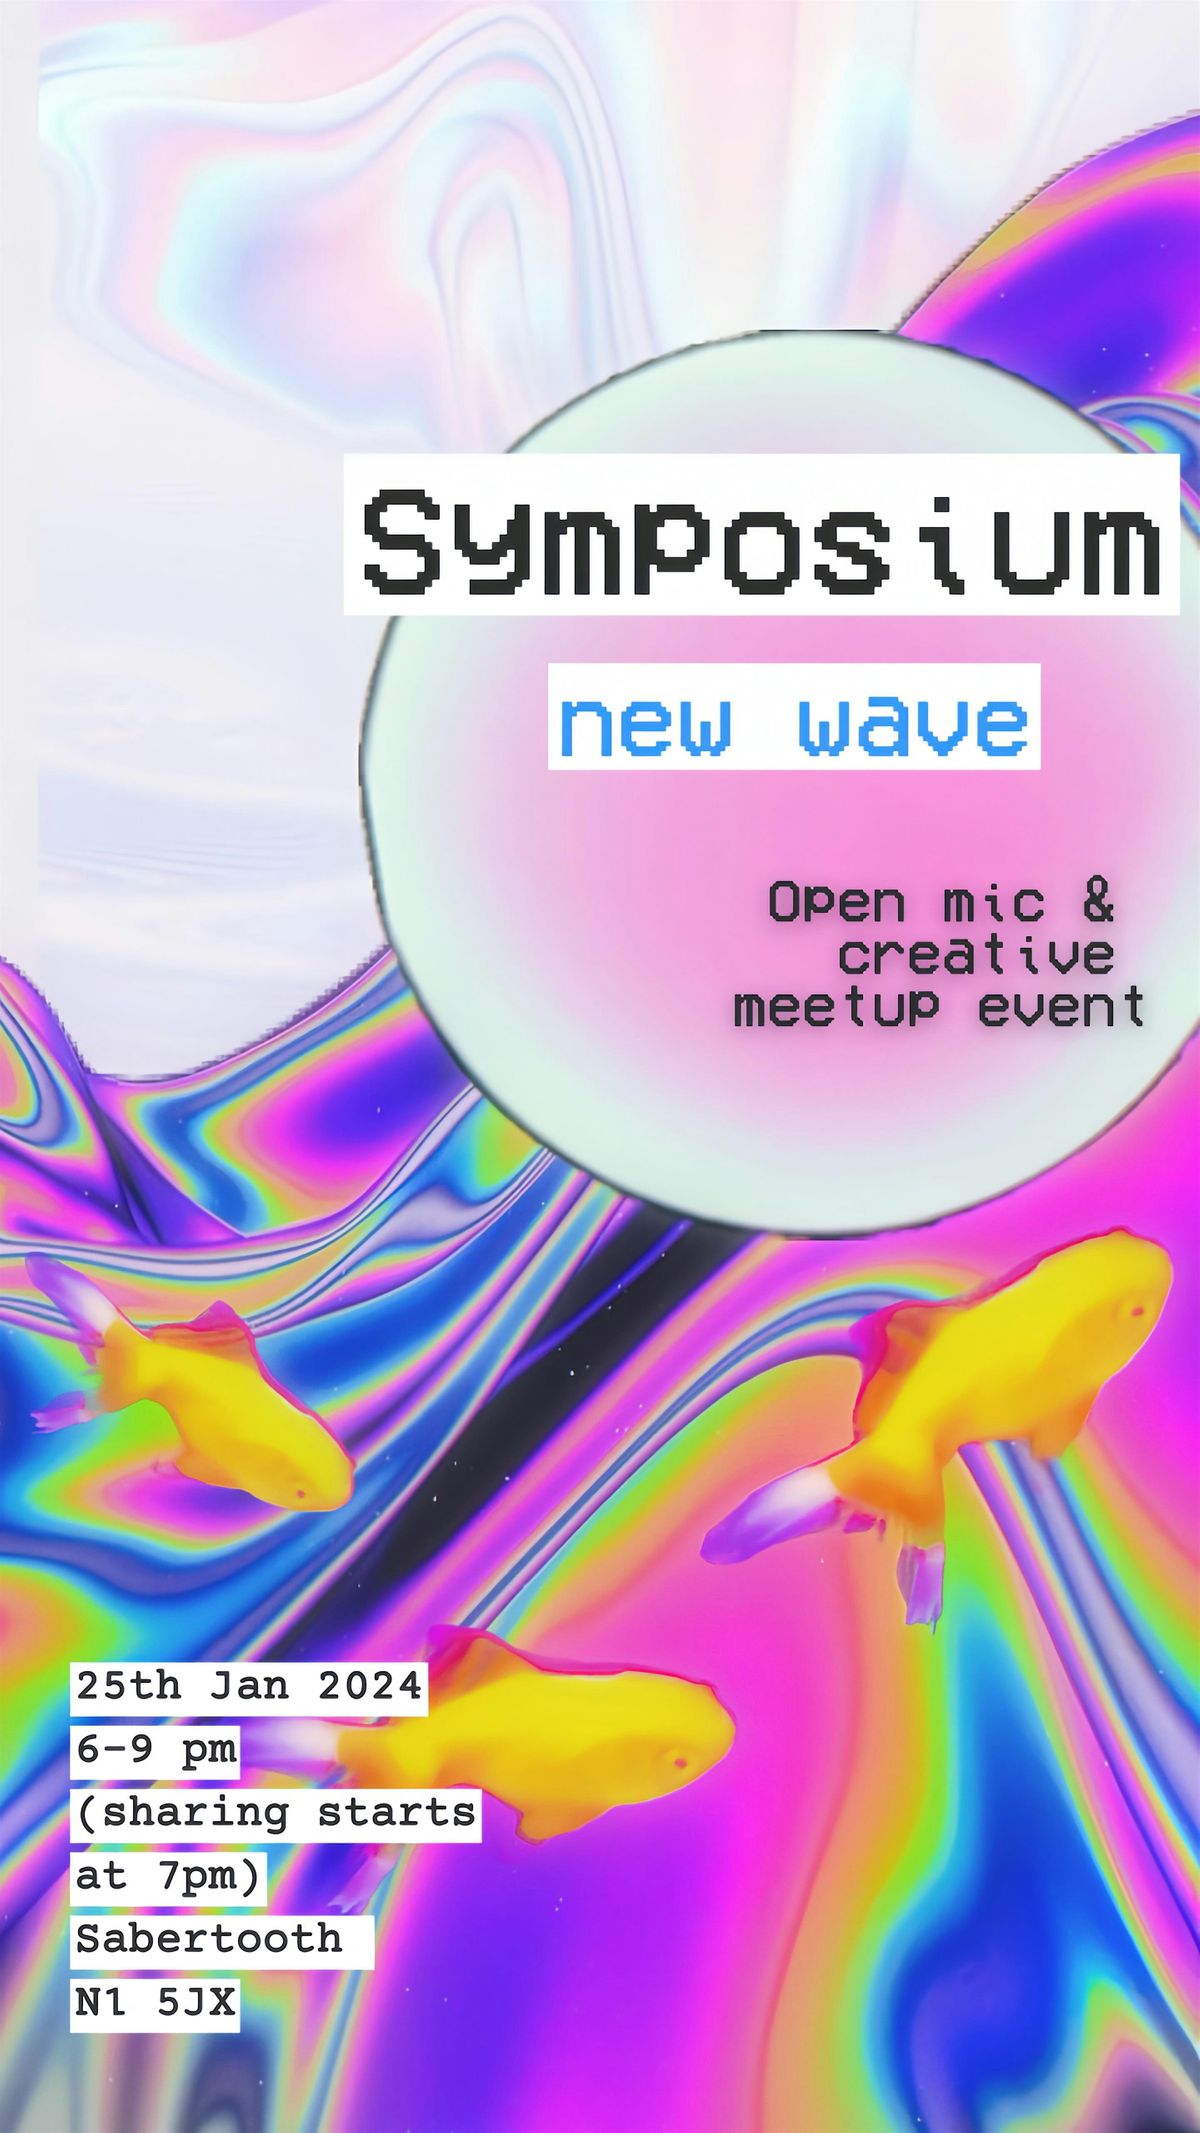 Symposium: An open mic platform for creative material, a place to connect.